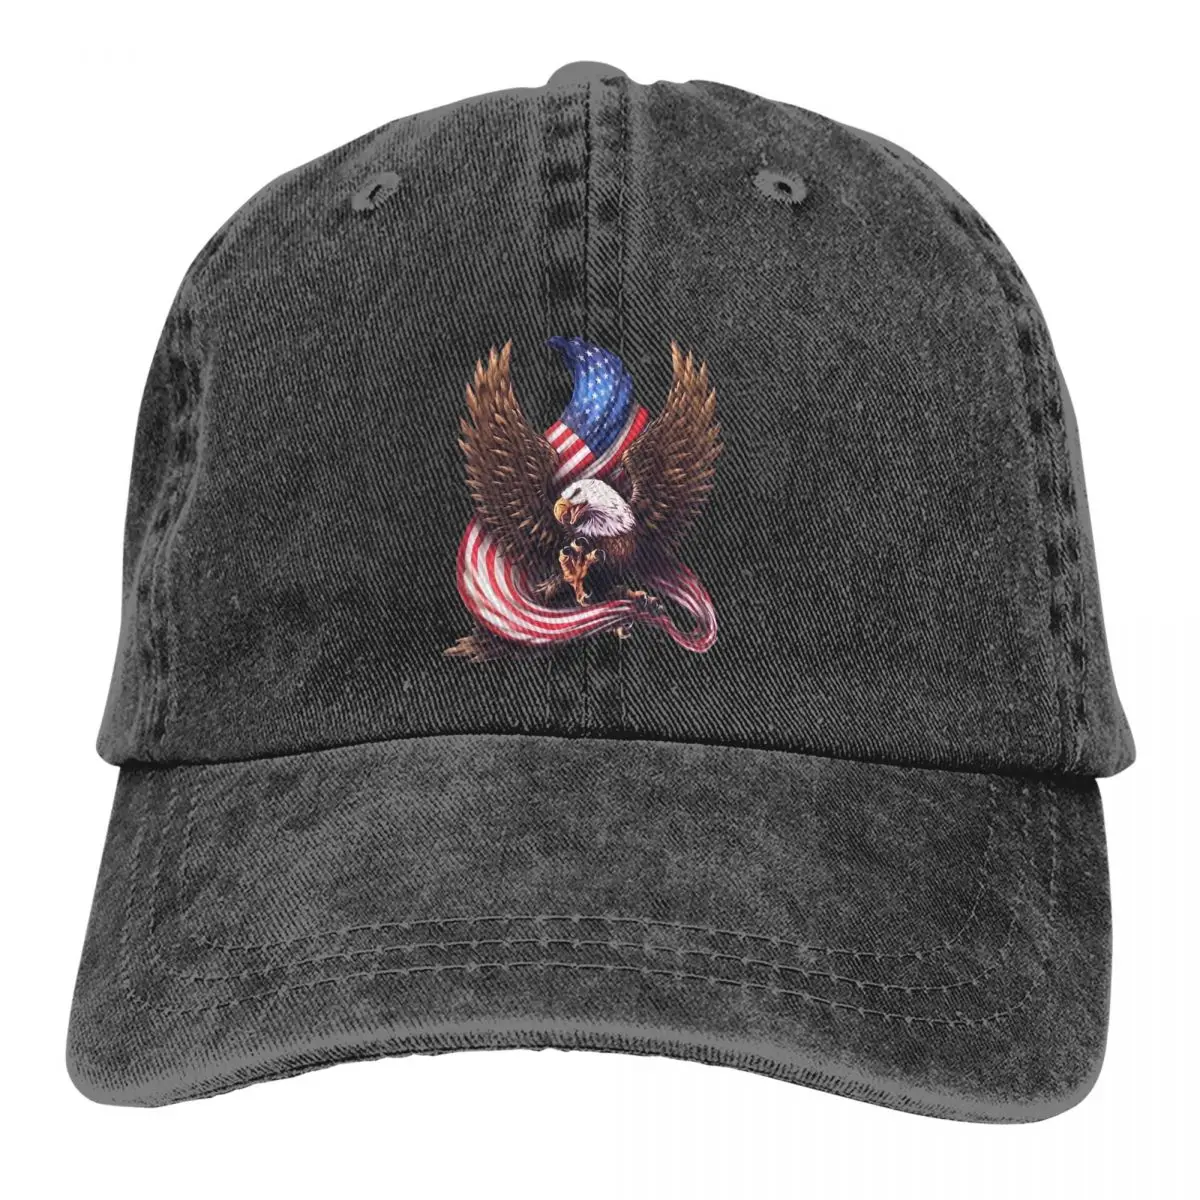 

American Eagle Multicolor Hat Peaked Women's Cap Flag Bald Personalized Visor Protection Hats